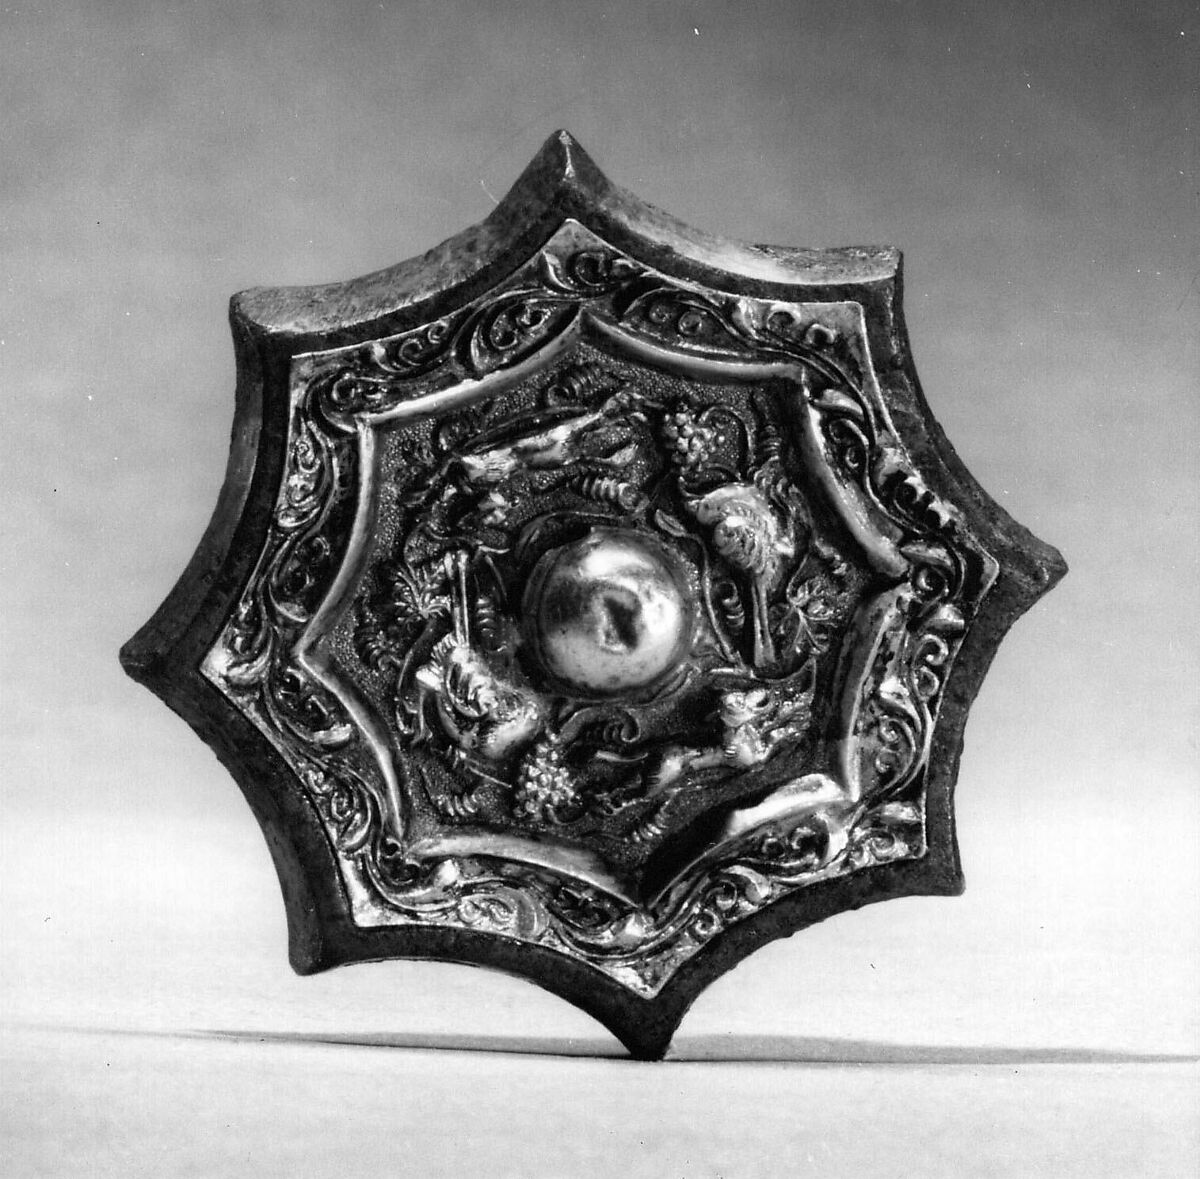 Mirror in the shape of an eight-lobed flower, Bronze with repoussé gold back, China 